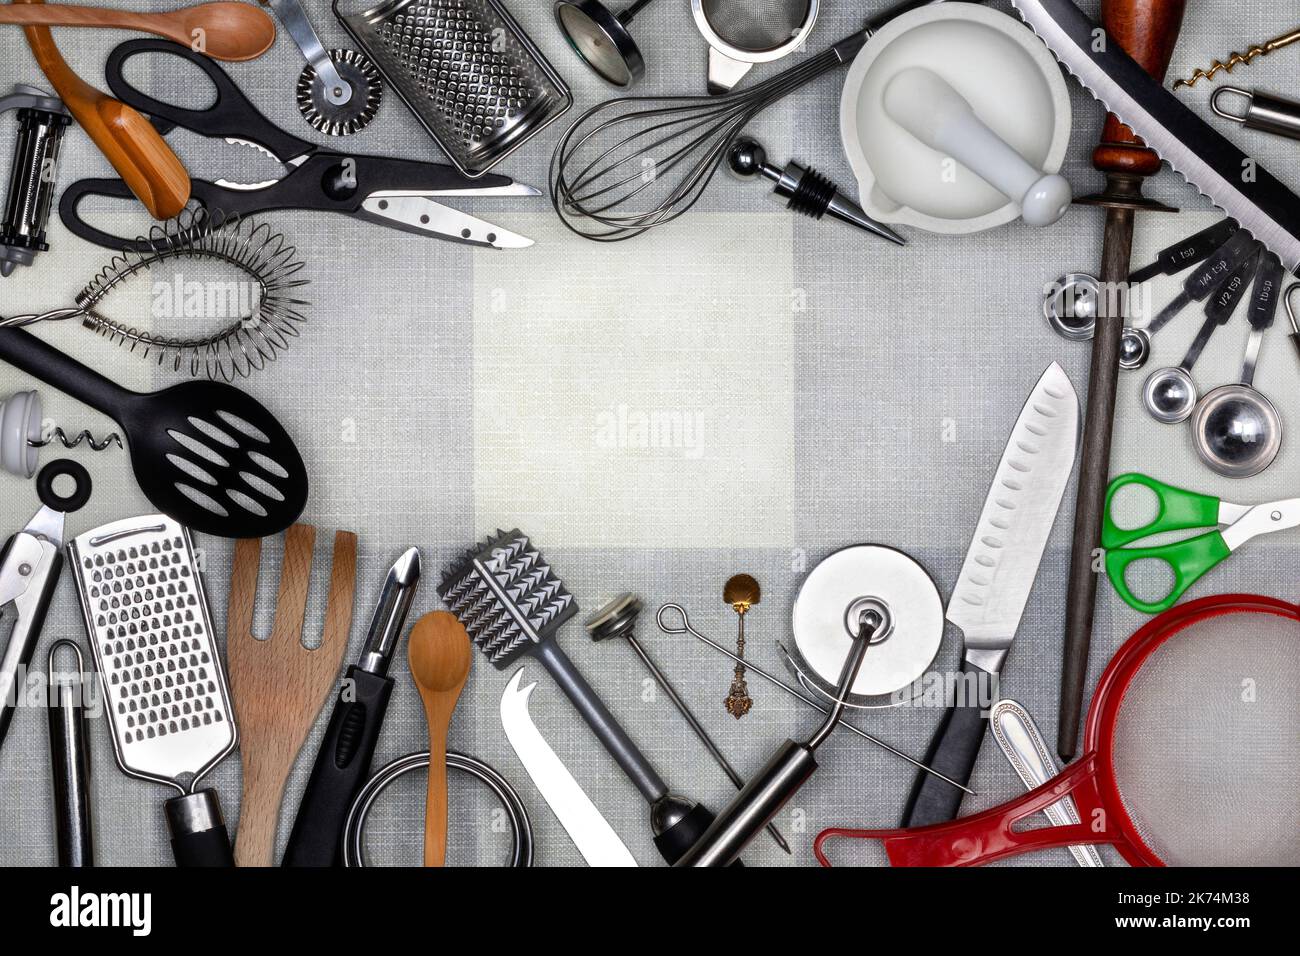 Kitchen Utensils - Kitchen utensils are small hand held tools used for food preparation. Common kitchen tasks include cutting food items to size, baki Stock Photo